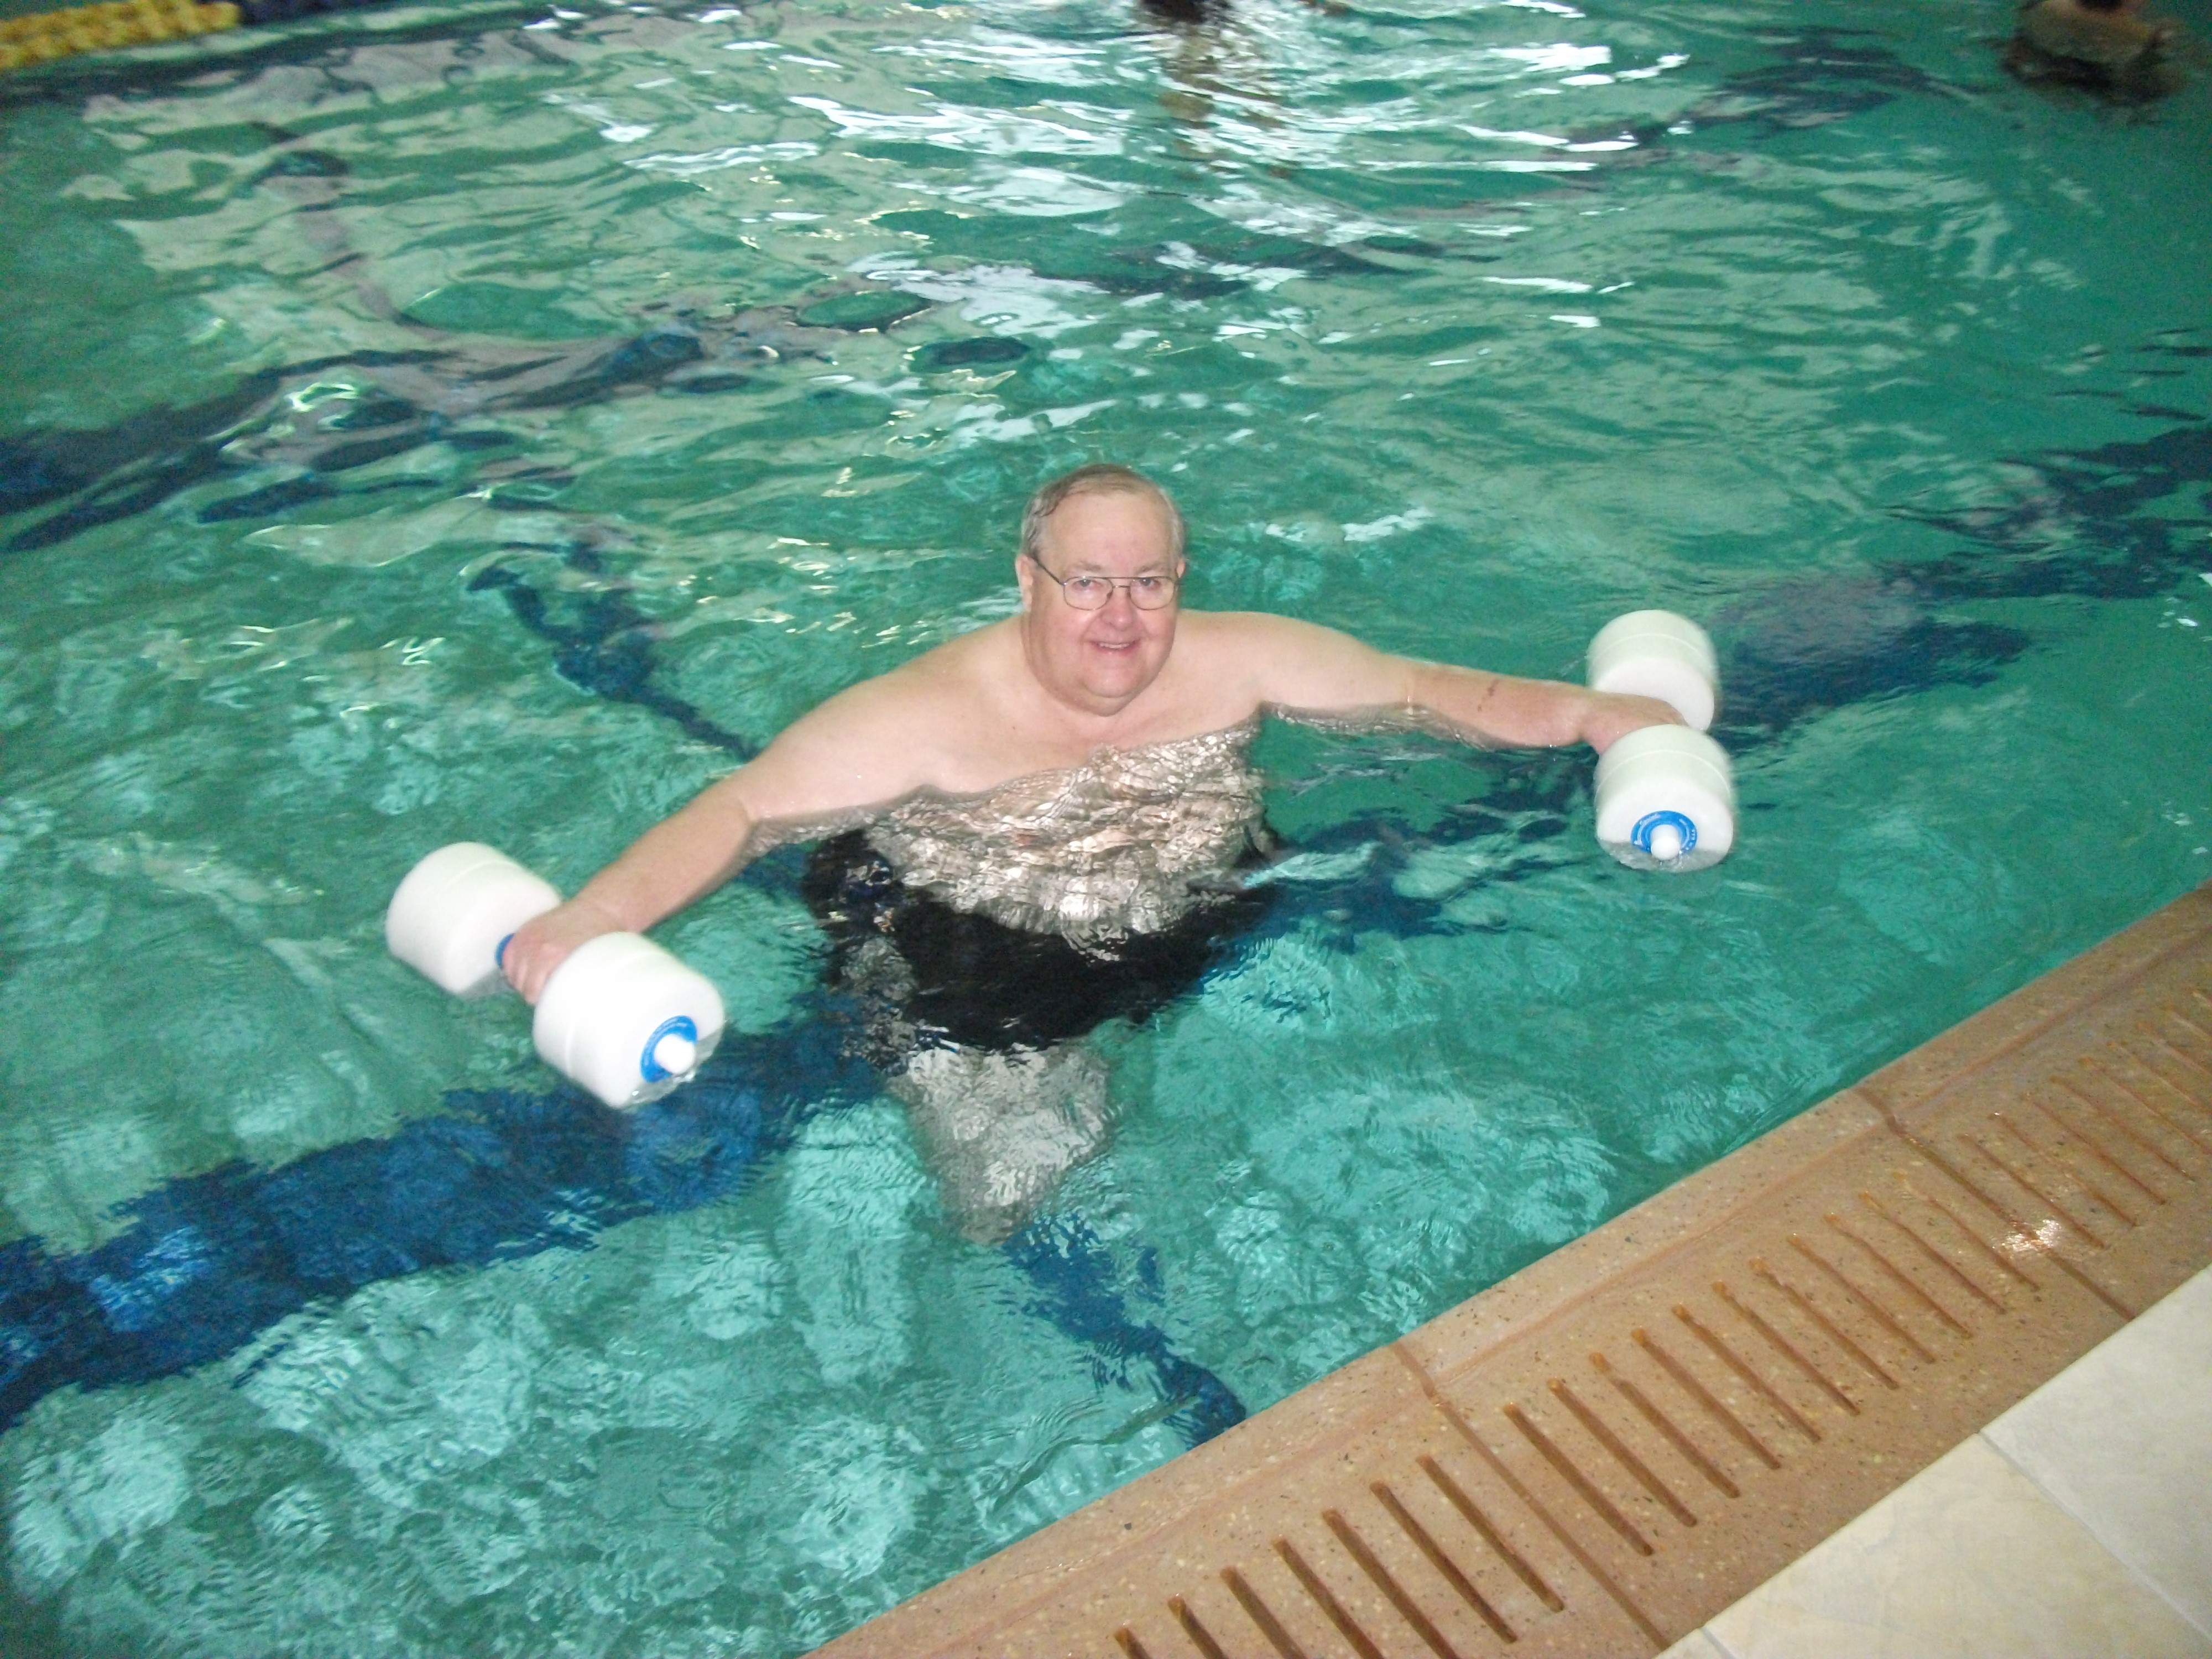 Ed's water workout is safe and effective.